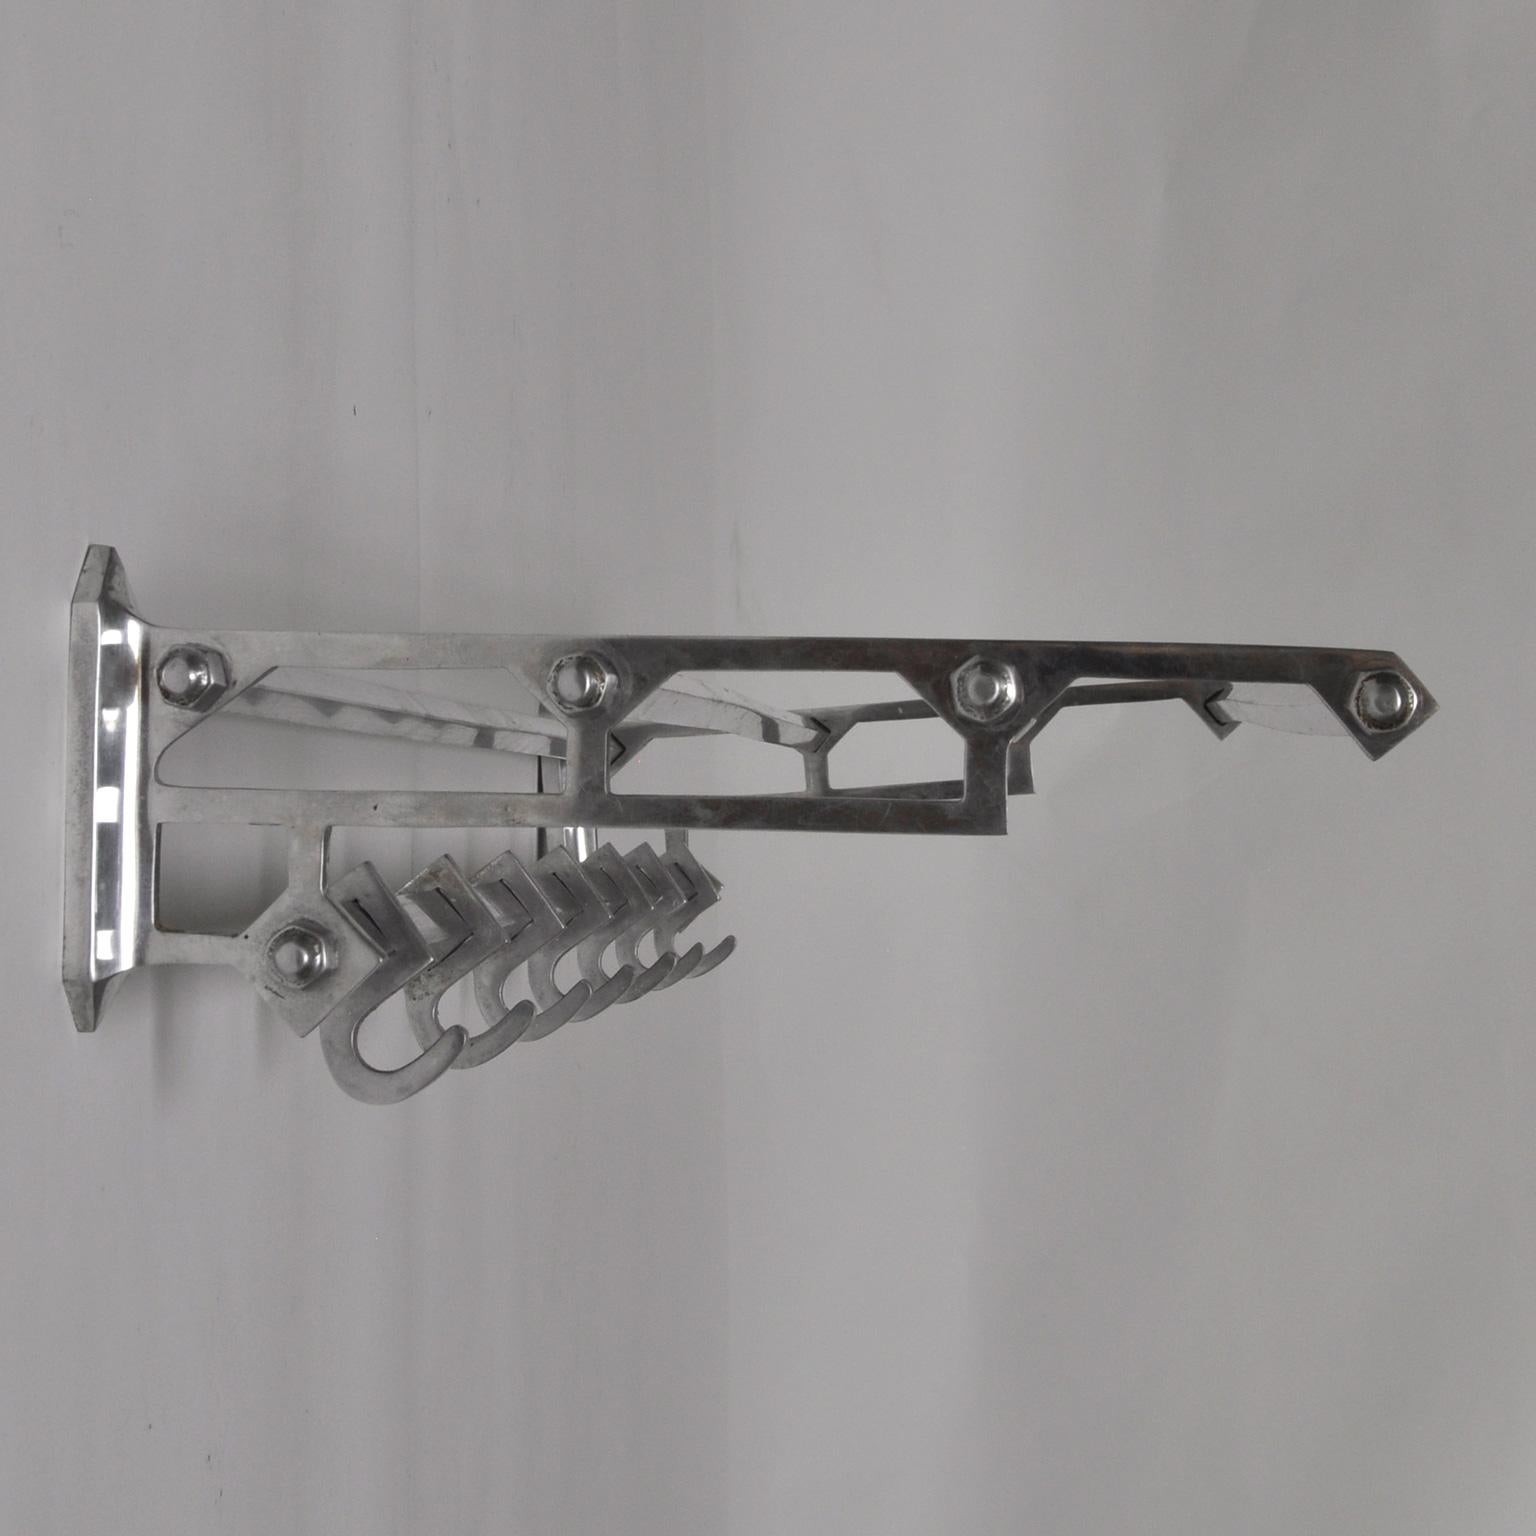 Coat rack in art deco style. Produced from aluminum and iron in the 1950s.